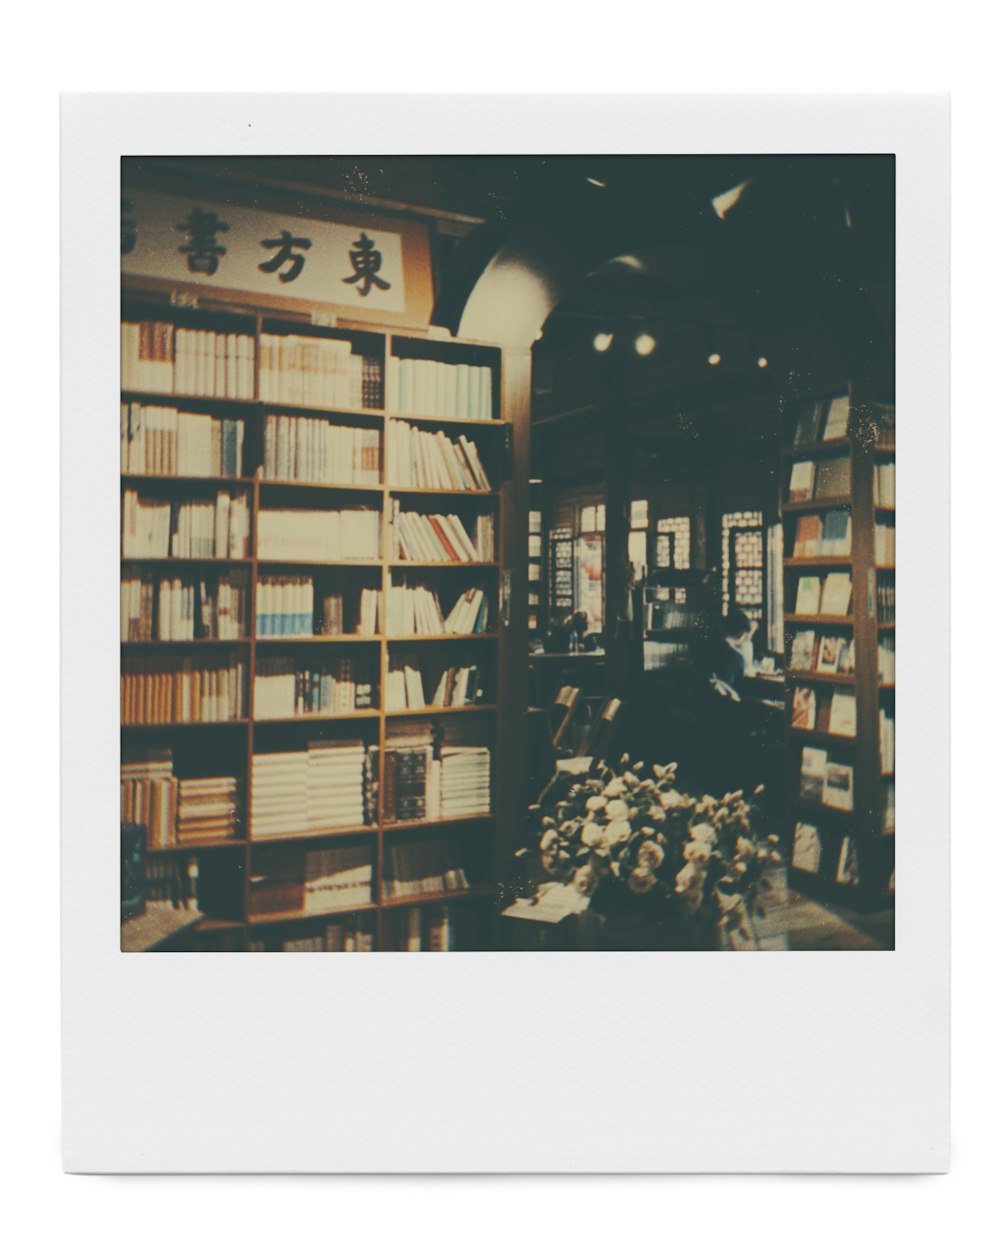 grayscale photo of books on shelves